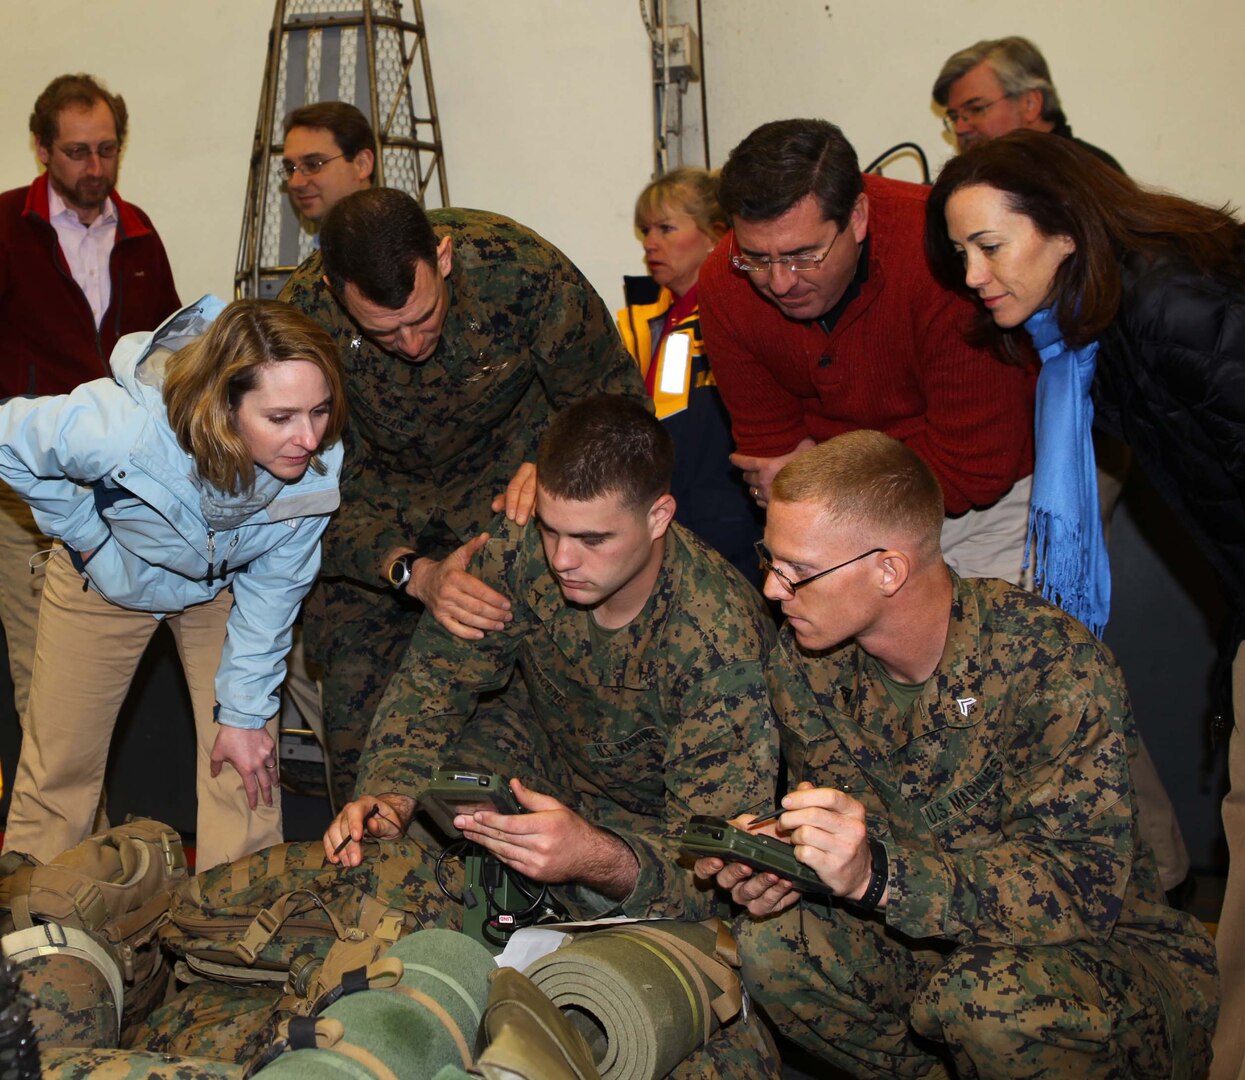 Three civilians lean over to look at a small device being held in the hand of a service member as other service members watch.